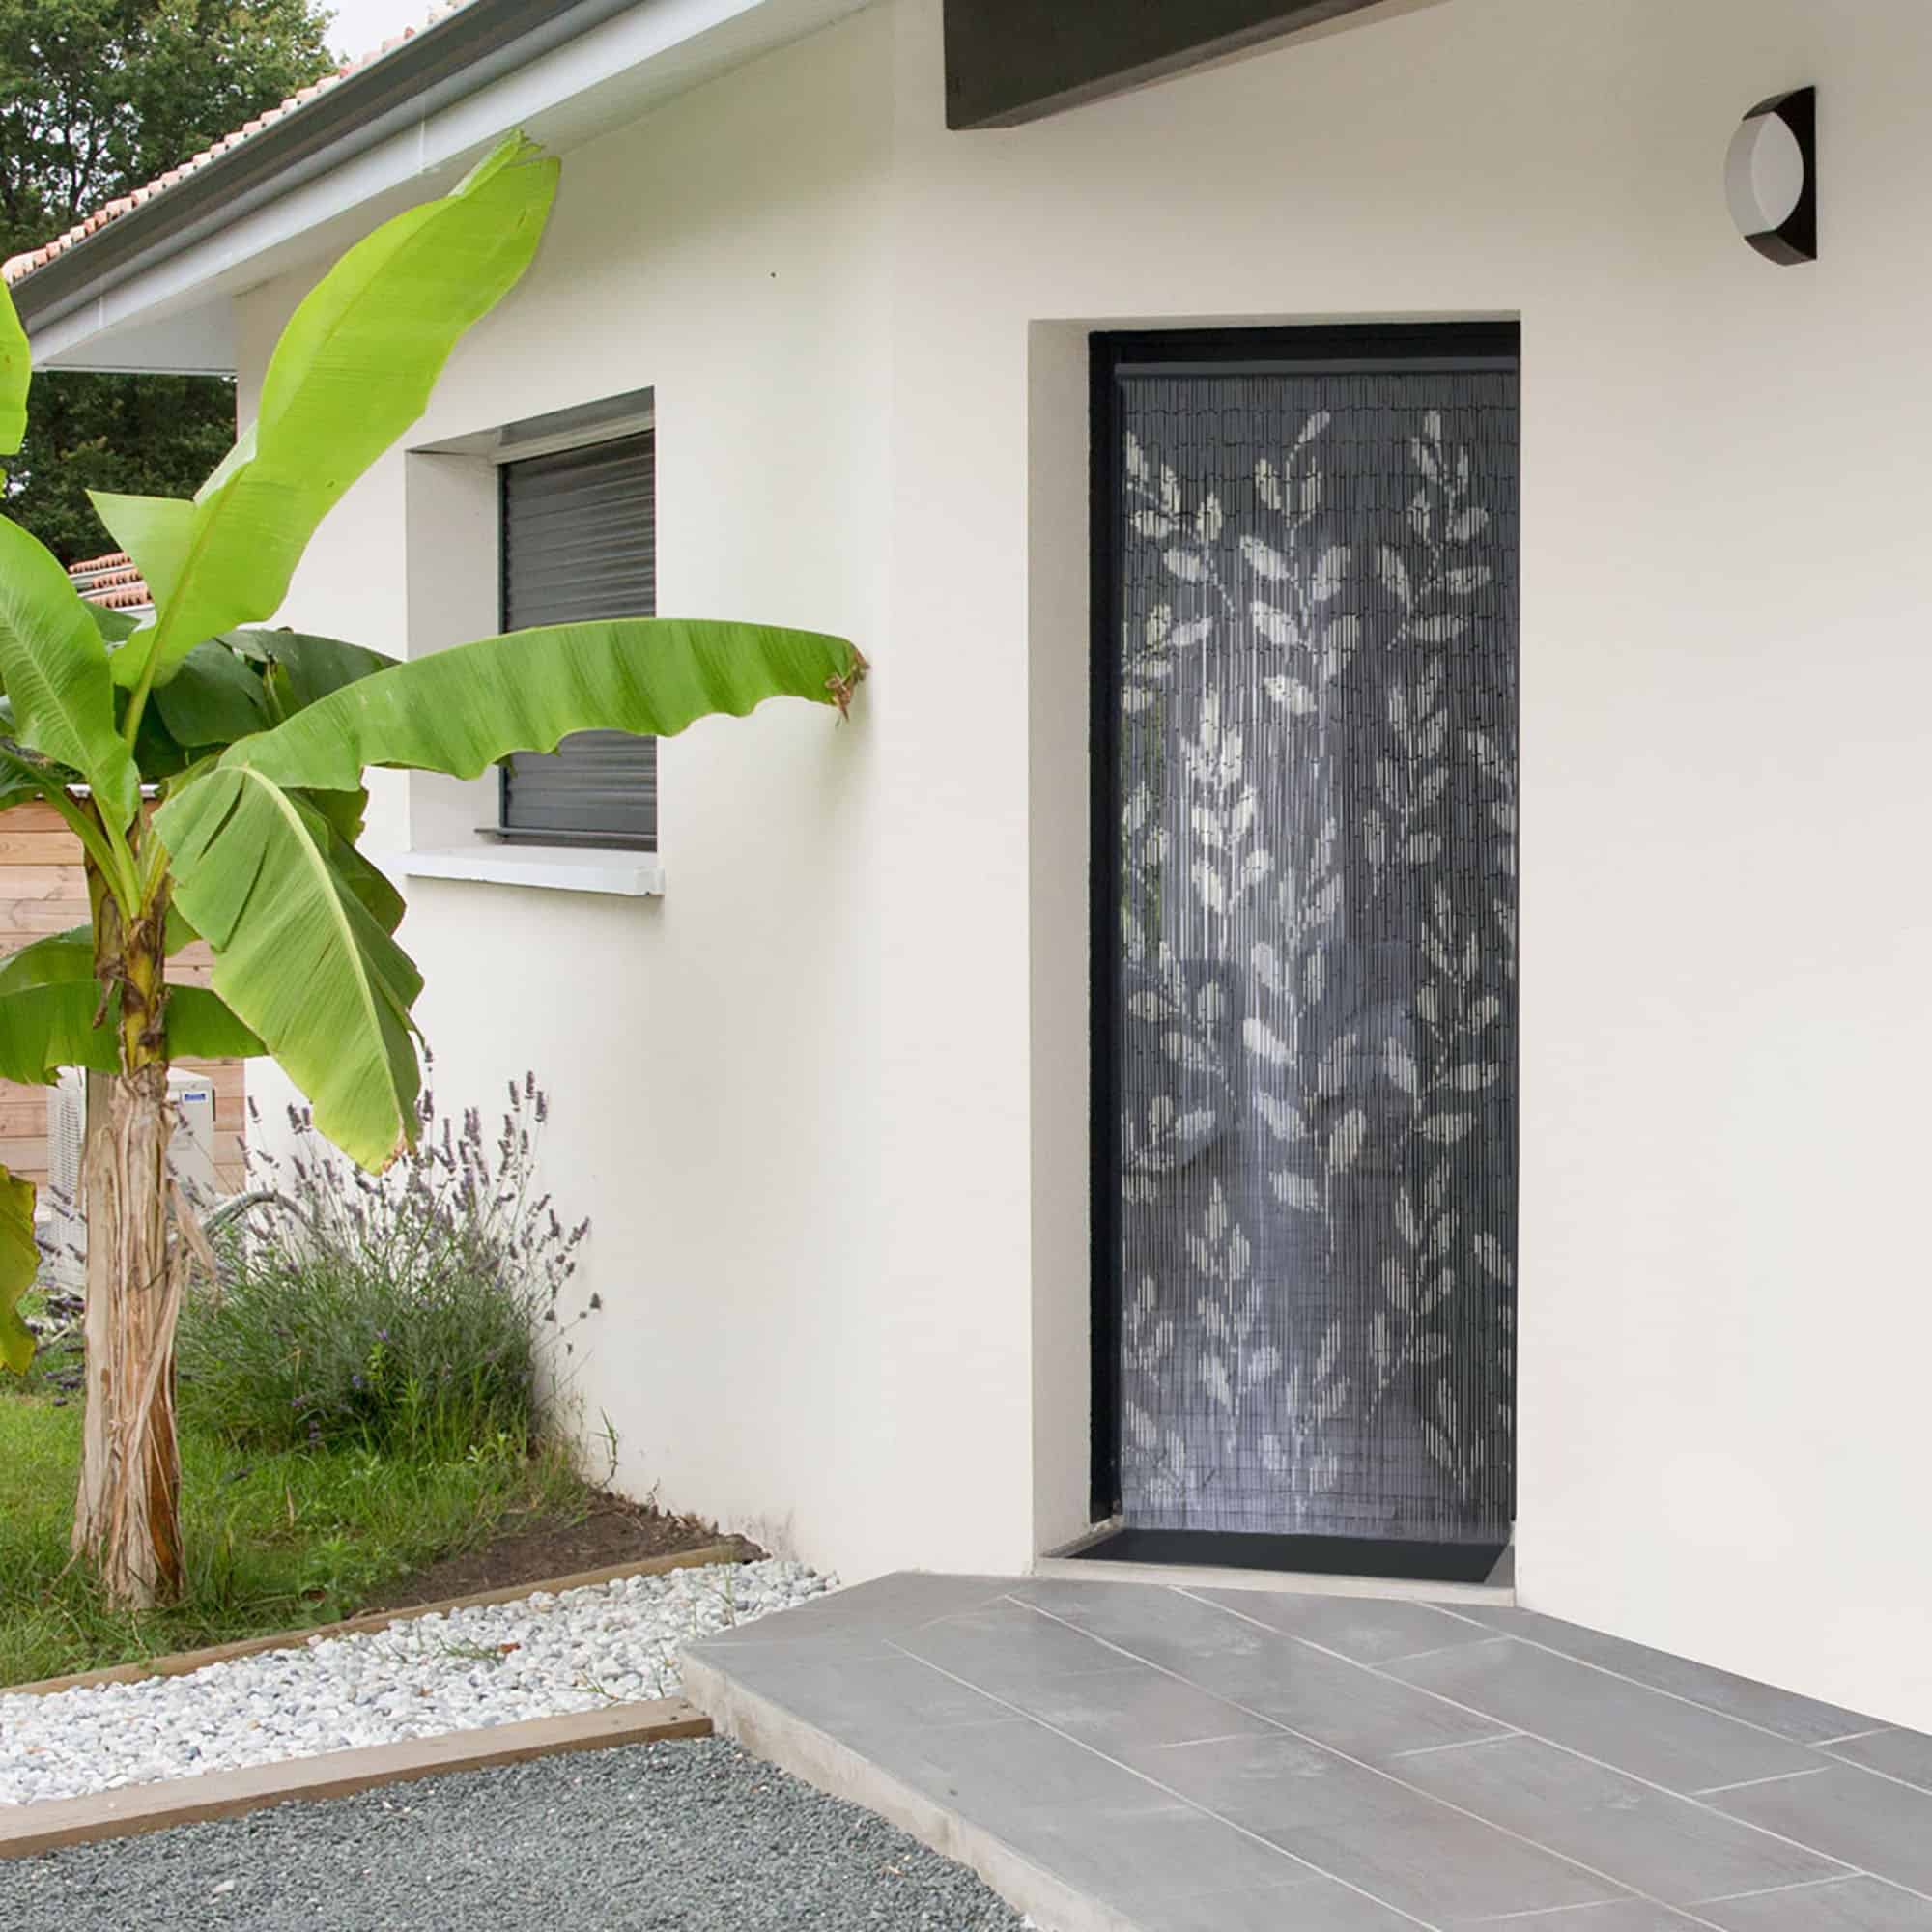 nature-inspired door curtain in situation at entrance door